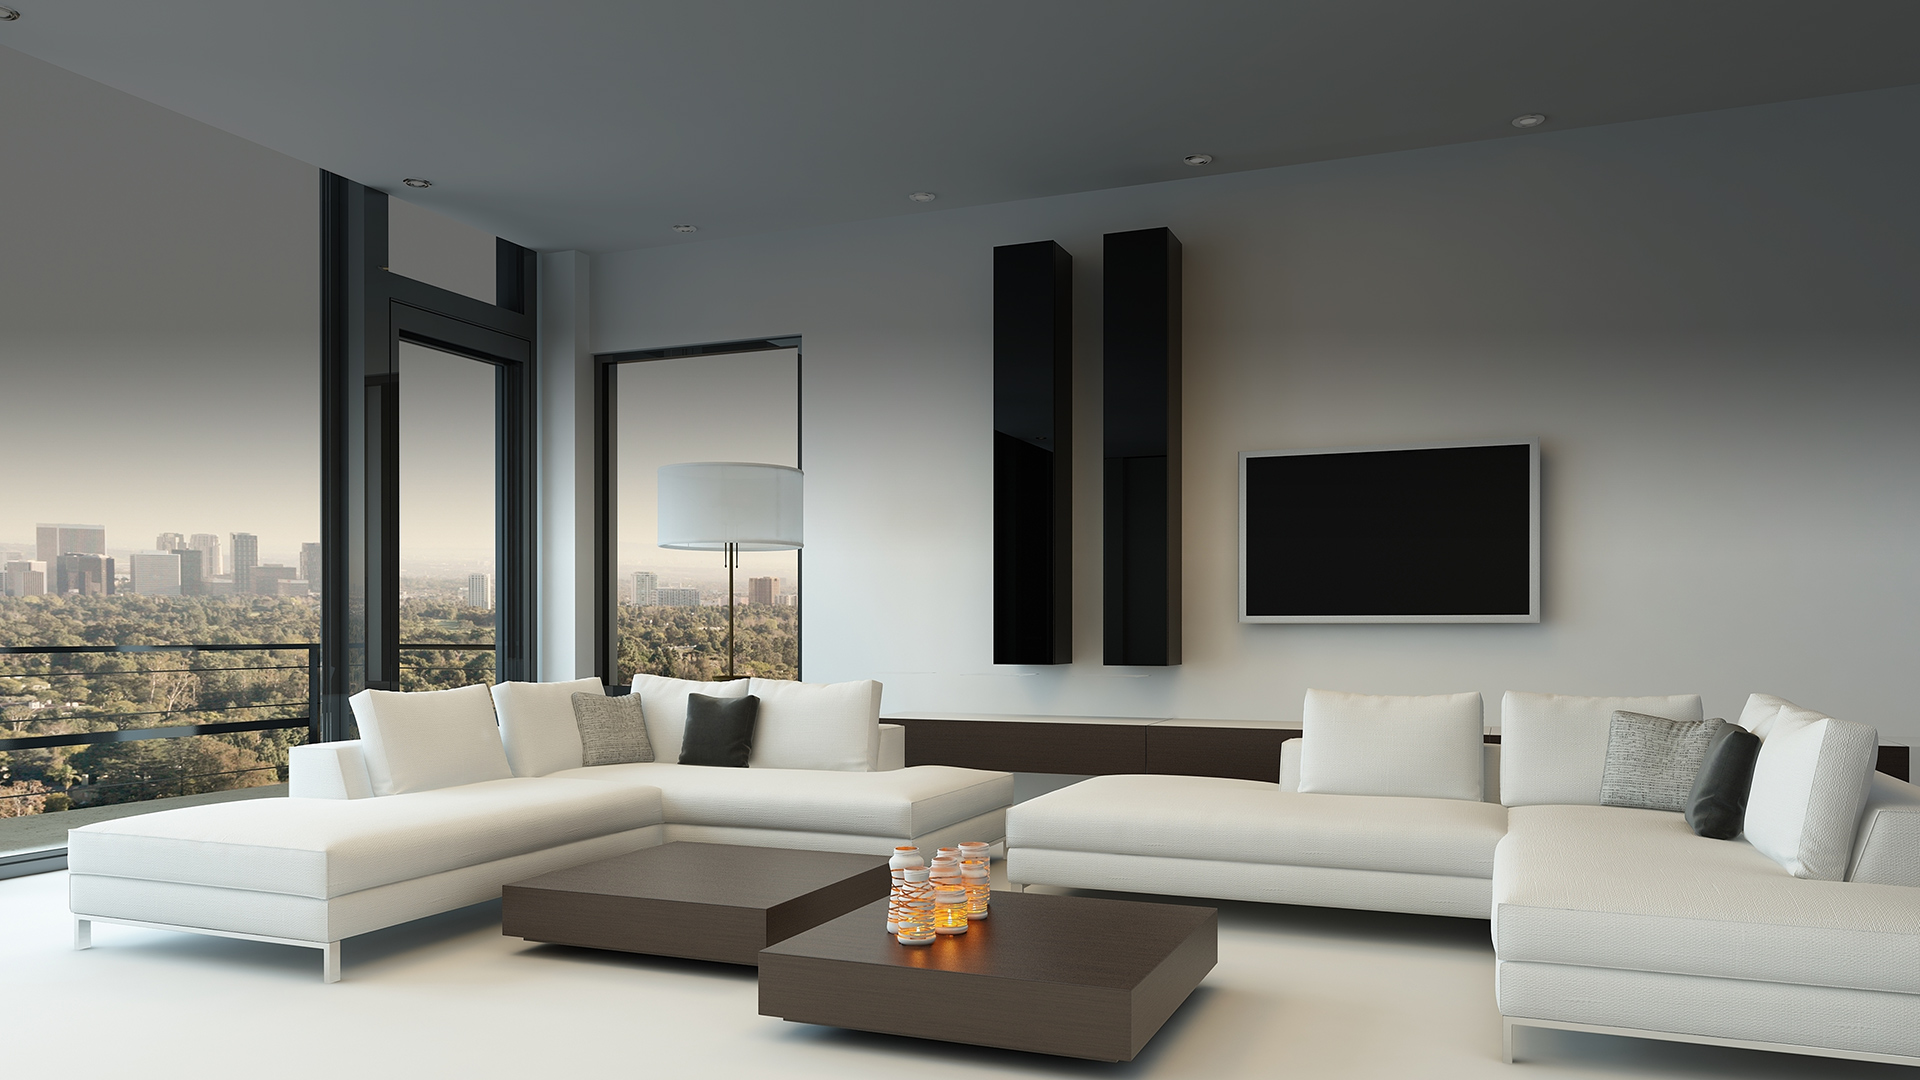 Luxe, Affordable Interior Design Services in Torrance, CA ...
